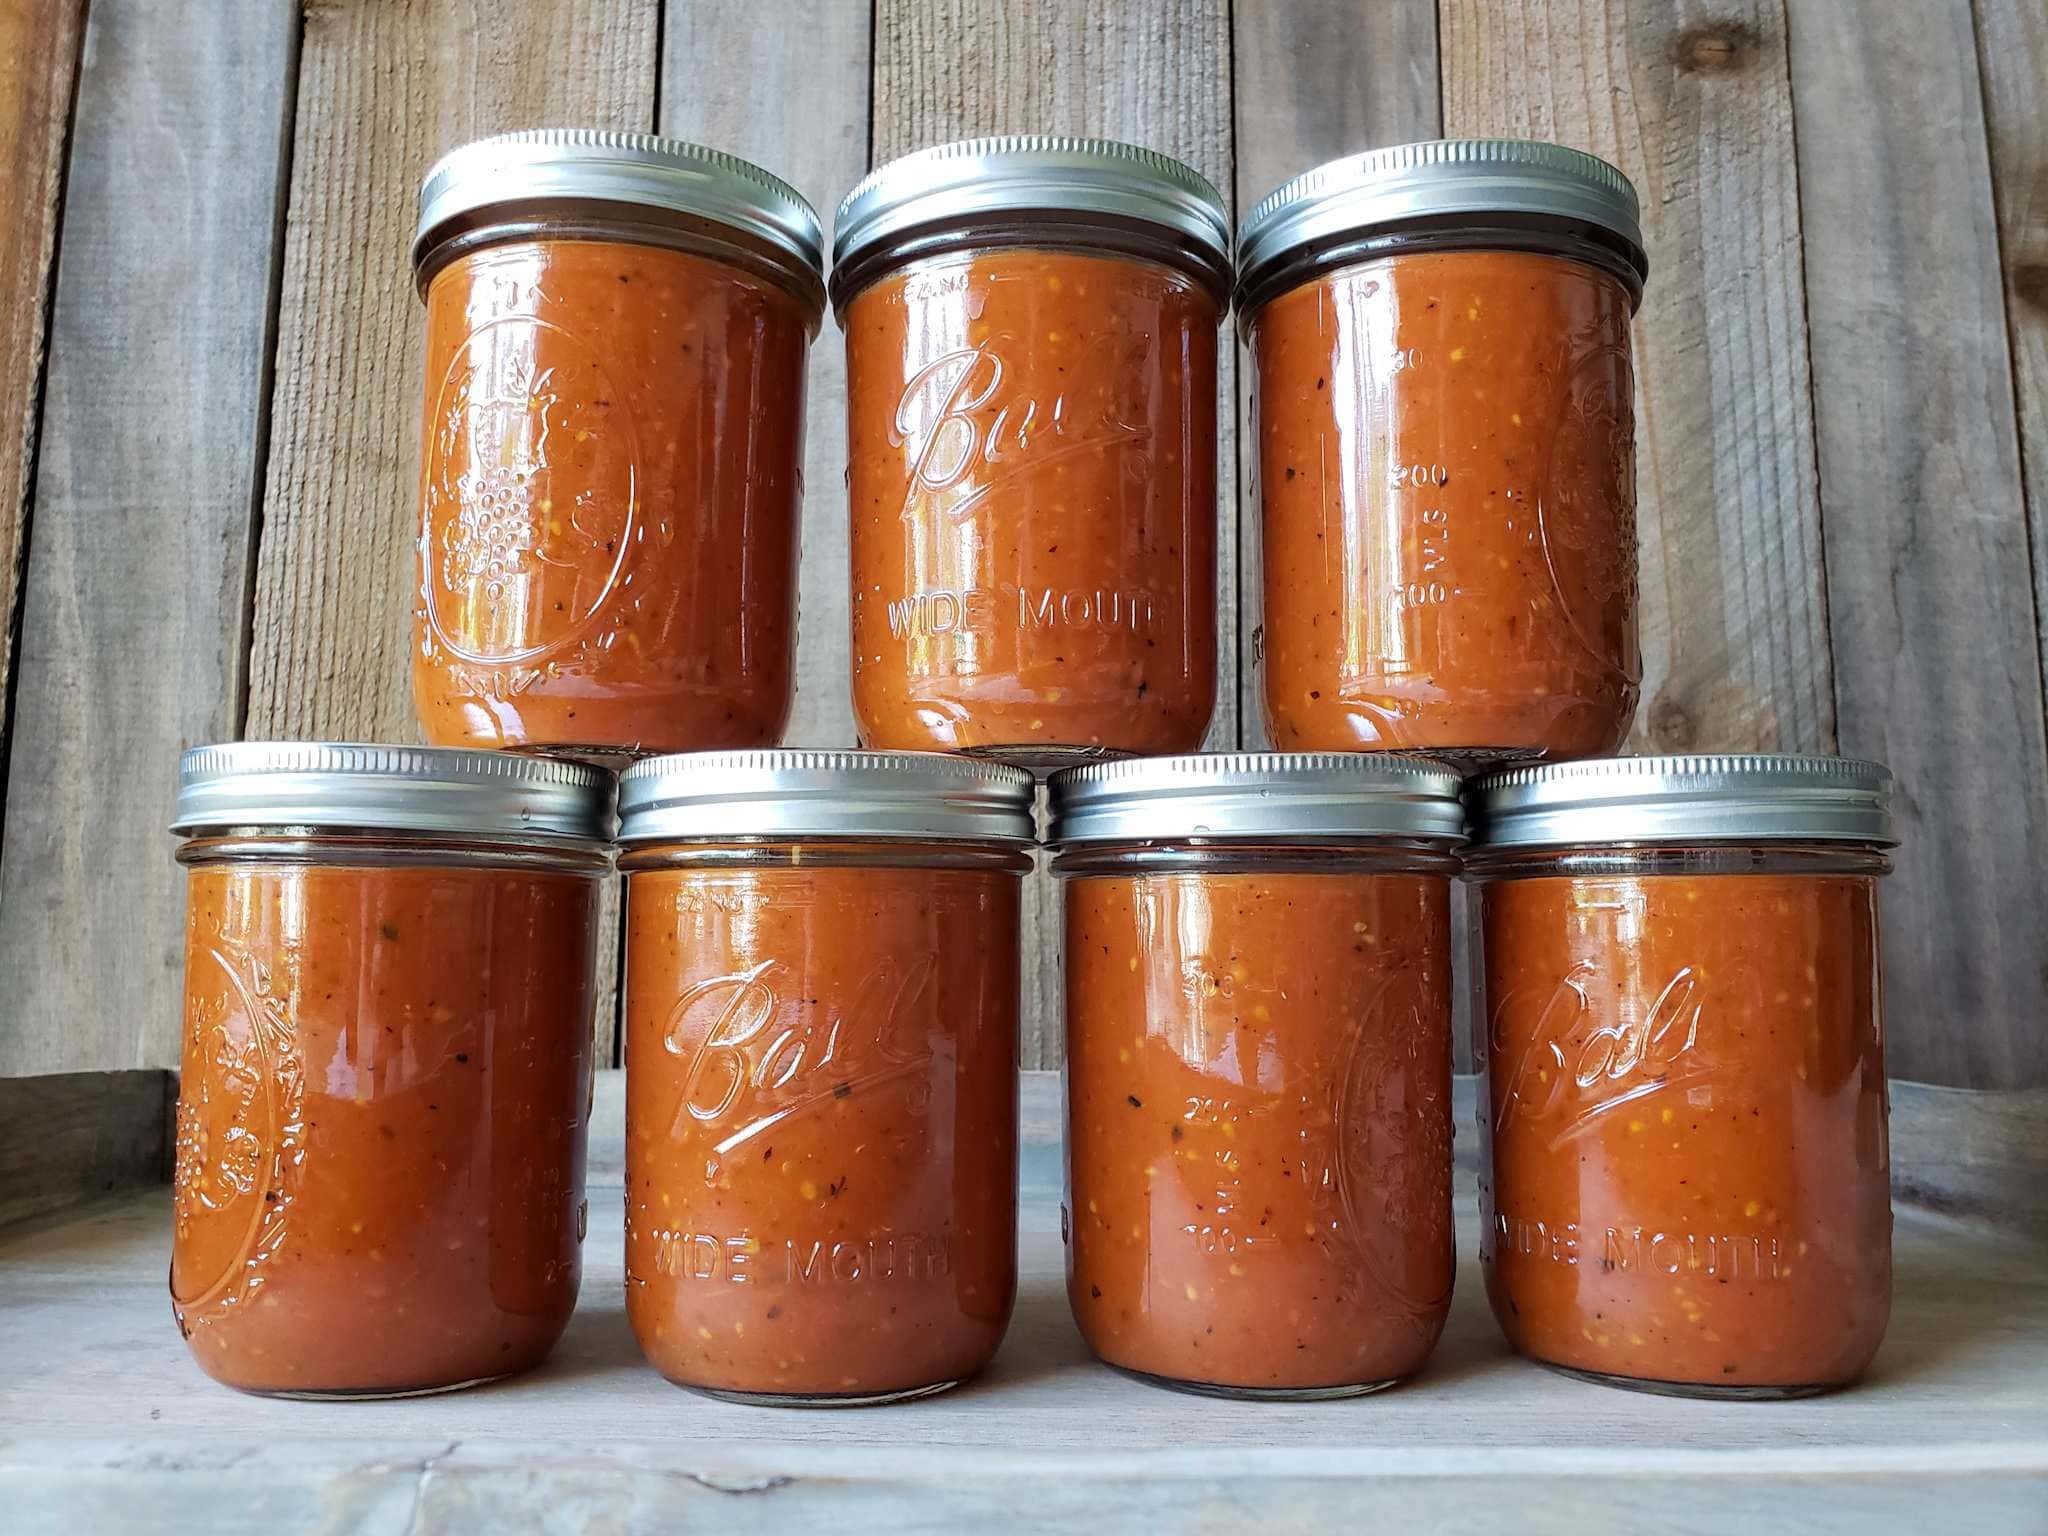 Seven pint jars of roasted tomato sauce are shown, four jars along the bottom with three jars stacked on top of the bottom four. The sauce is dark red in color with specks of black from the roasting. When you grow tomatoes, preserving them is a must to make the most of your harvest. 